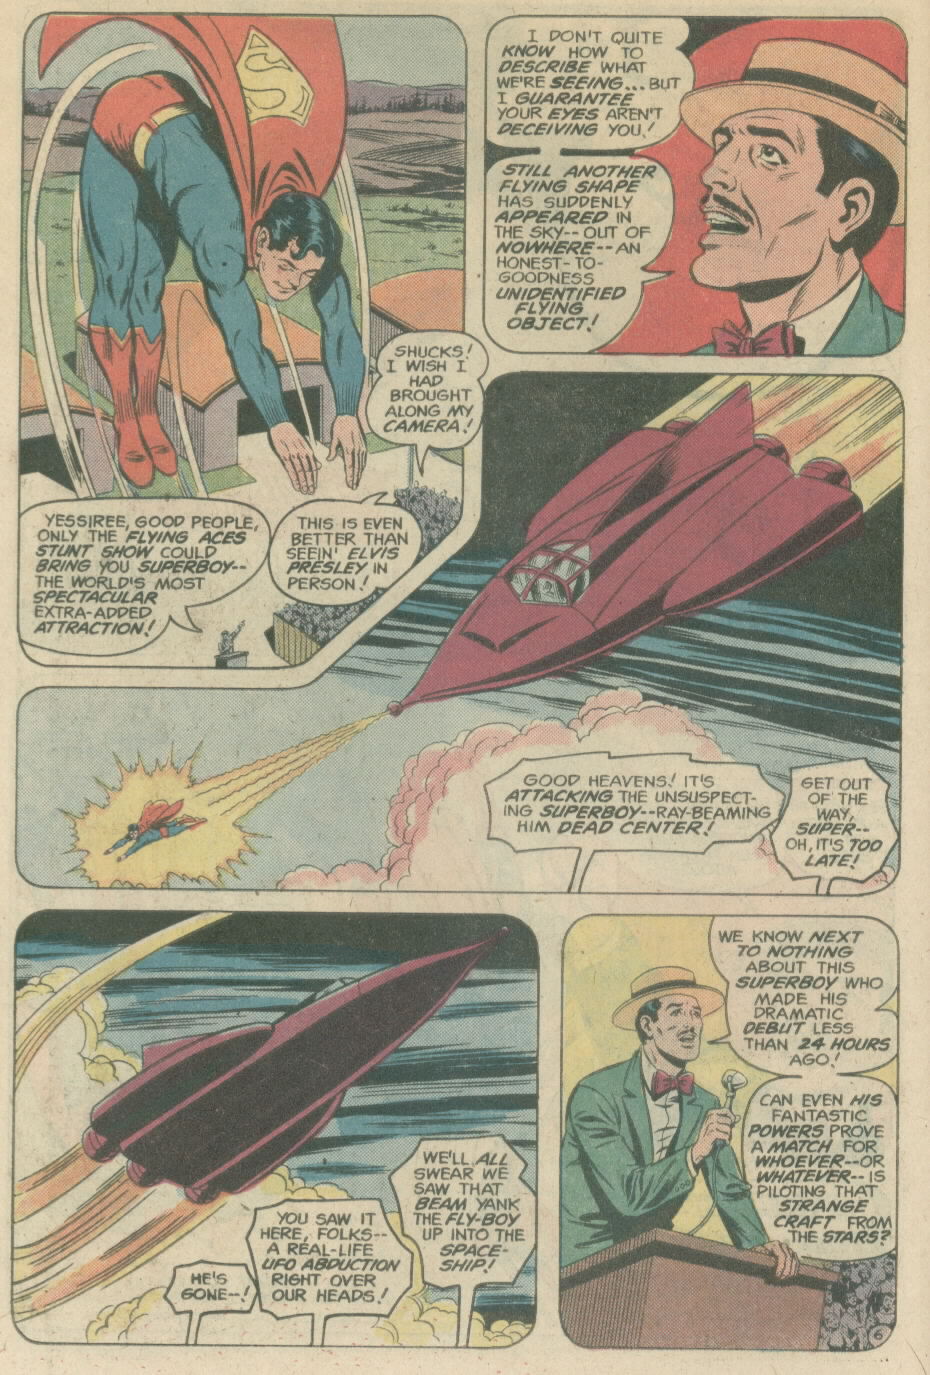 The New Adventures of Superboy 1 Page 6